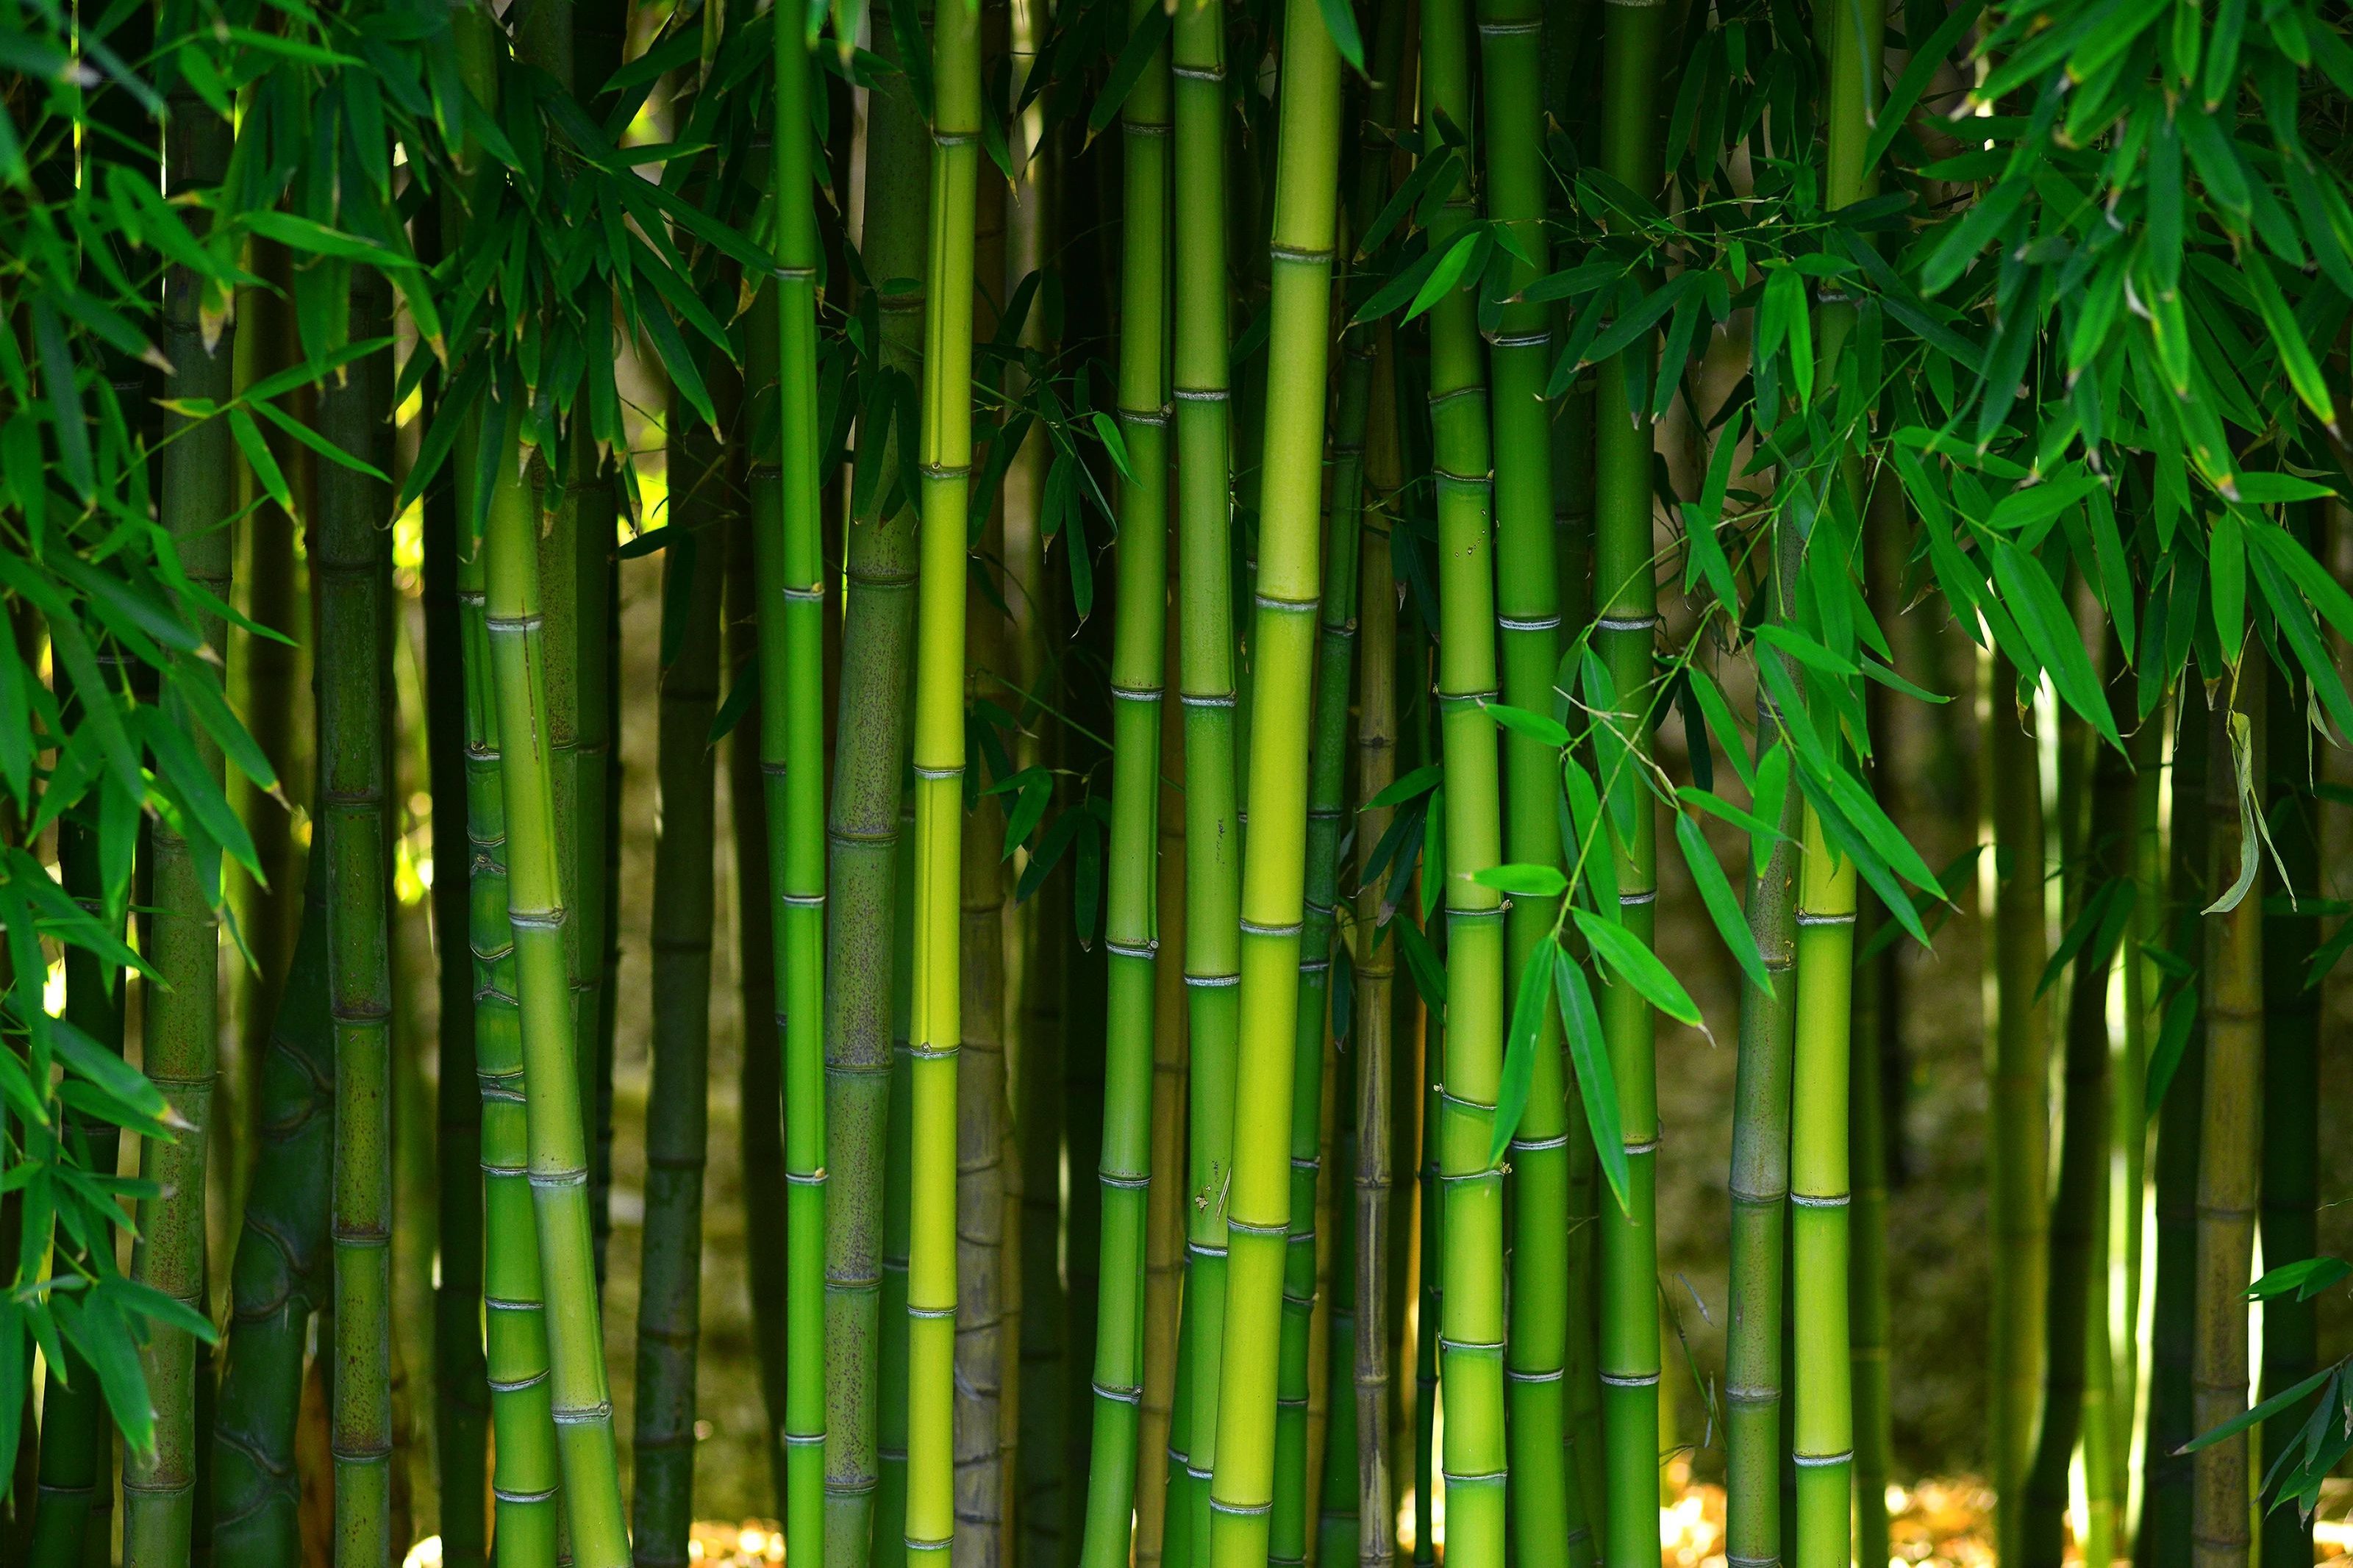 Bamboo forest - Carpet World of Martinsburg in WV